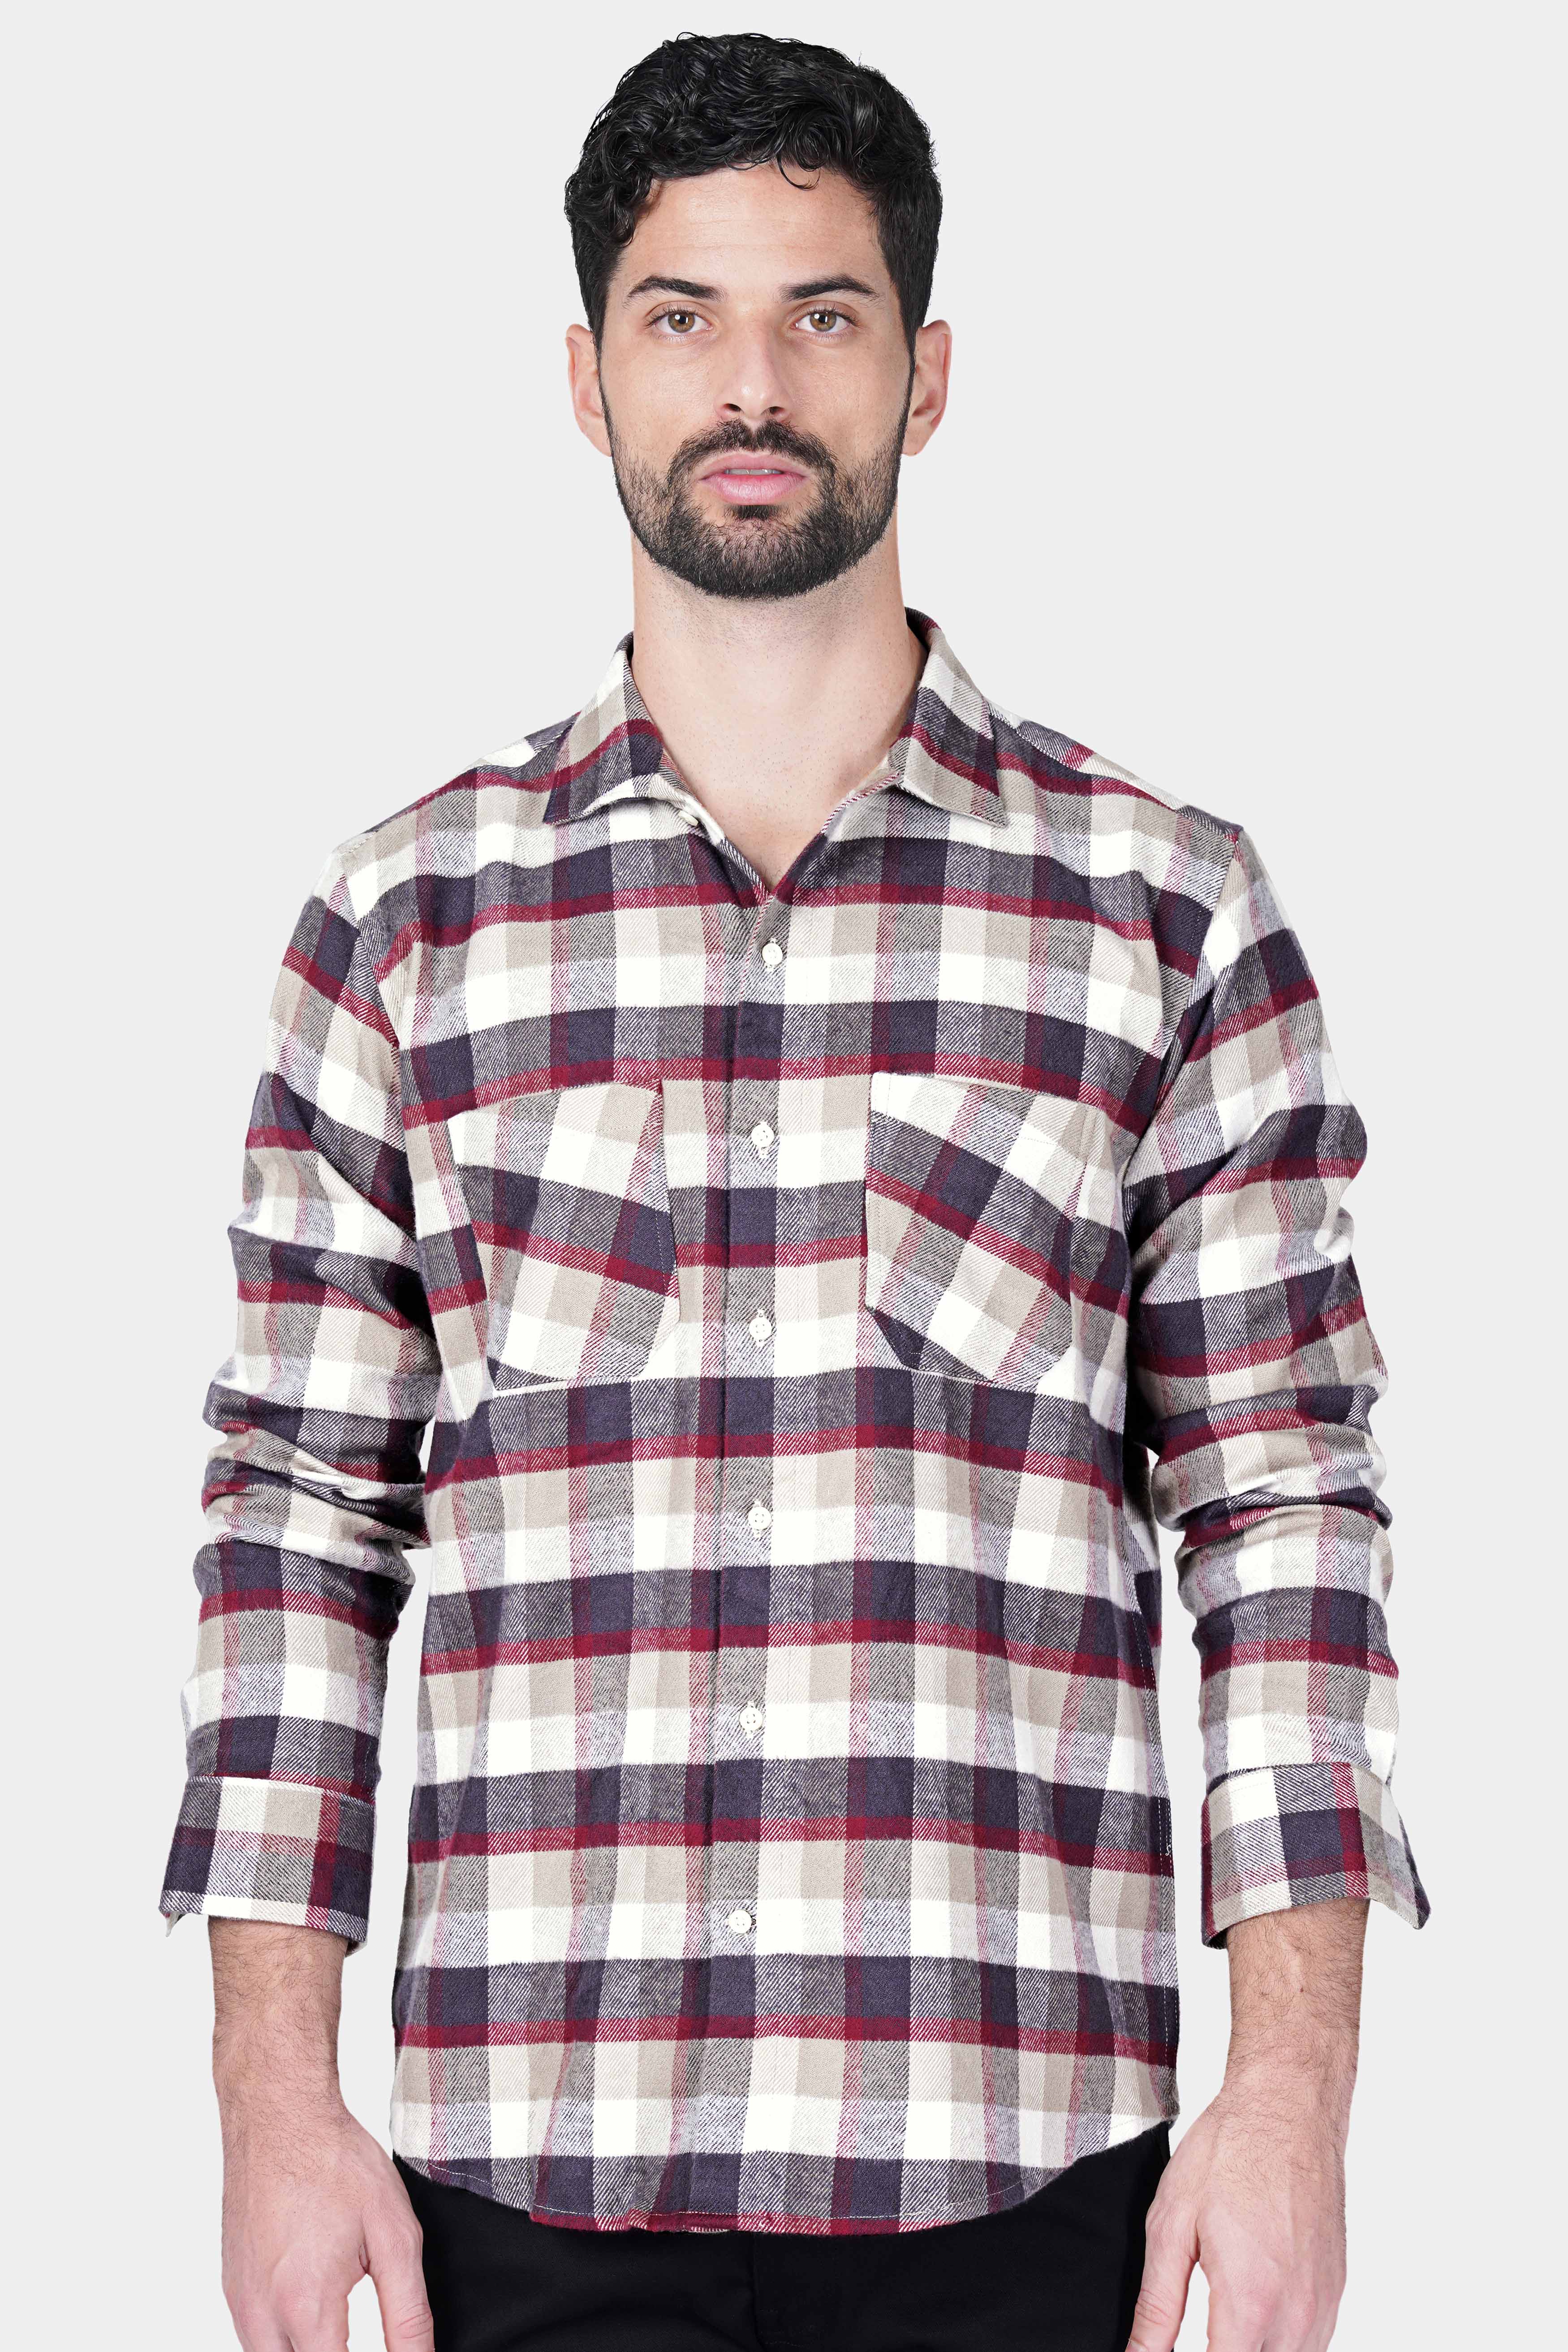 Comet Grey with Merlot Red Checkered and Printed Flannel Designer Shirt 9058-CA-OS-RPRT118-38, 9058-CA-OS-RPRT118-H-38, 9058-CA-OS-RPRT118-39, 9058-CA-OS-RPRT118-H-39, 9058-CA-OS-RPRT118-40, 9058-CA-OS-RPRT118-H-40, 9058-CA-OS-RPRT118-42, 9058-CA-OS-RPRT118-H-42, 9058-CA-OS-RPRT118-44, 9058-CA-OS-RPRT118-H-44, 9058-CA-OS-RPRT118-46, 9058-CA-OS-RPRT118-H-46, 9058-CA-OS-RPRT118-48, 9058-CA-OS-RPRT118-H-48, 9058-CA-OS-RPRT118-50, 9058-CA-OS-RPRT118-H-50, 9058-CA-OS-RPRT118-52, 9058-CA-OS-RPRT118-H-52